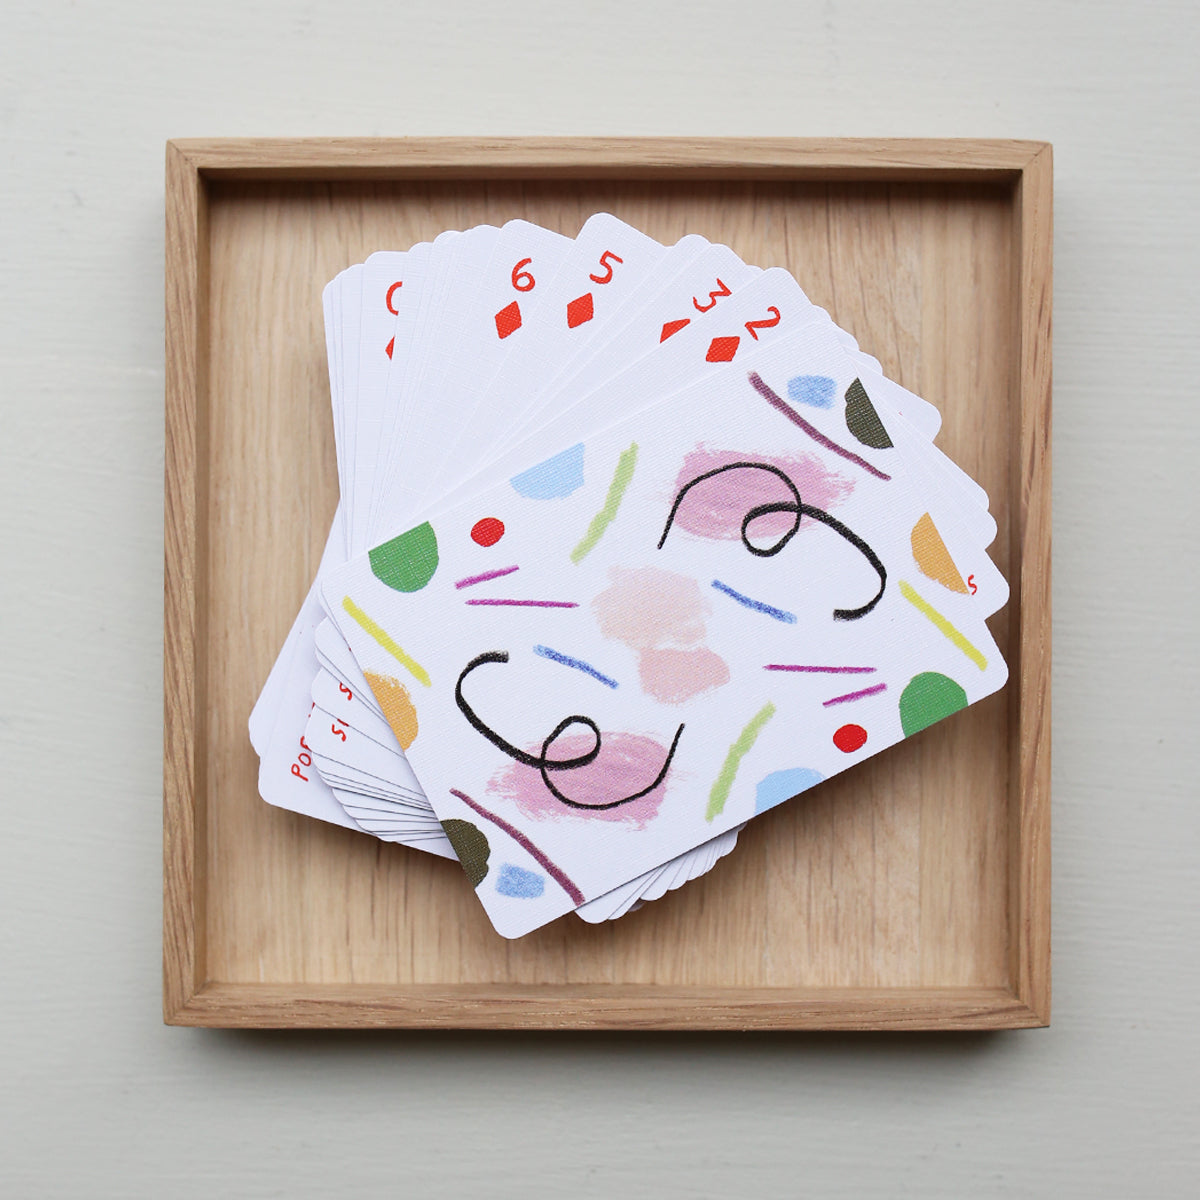 PLAYING CARDS // ART